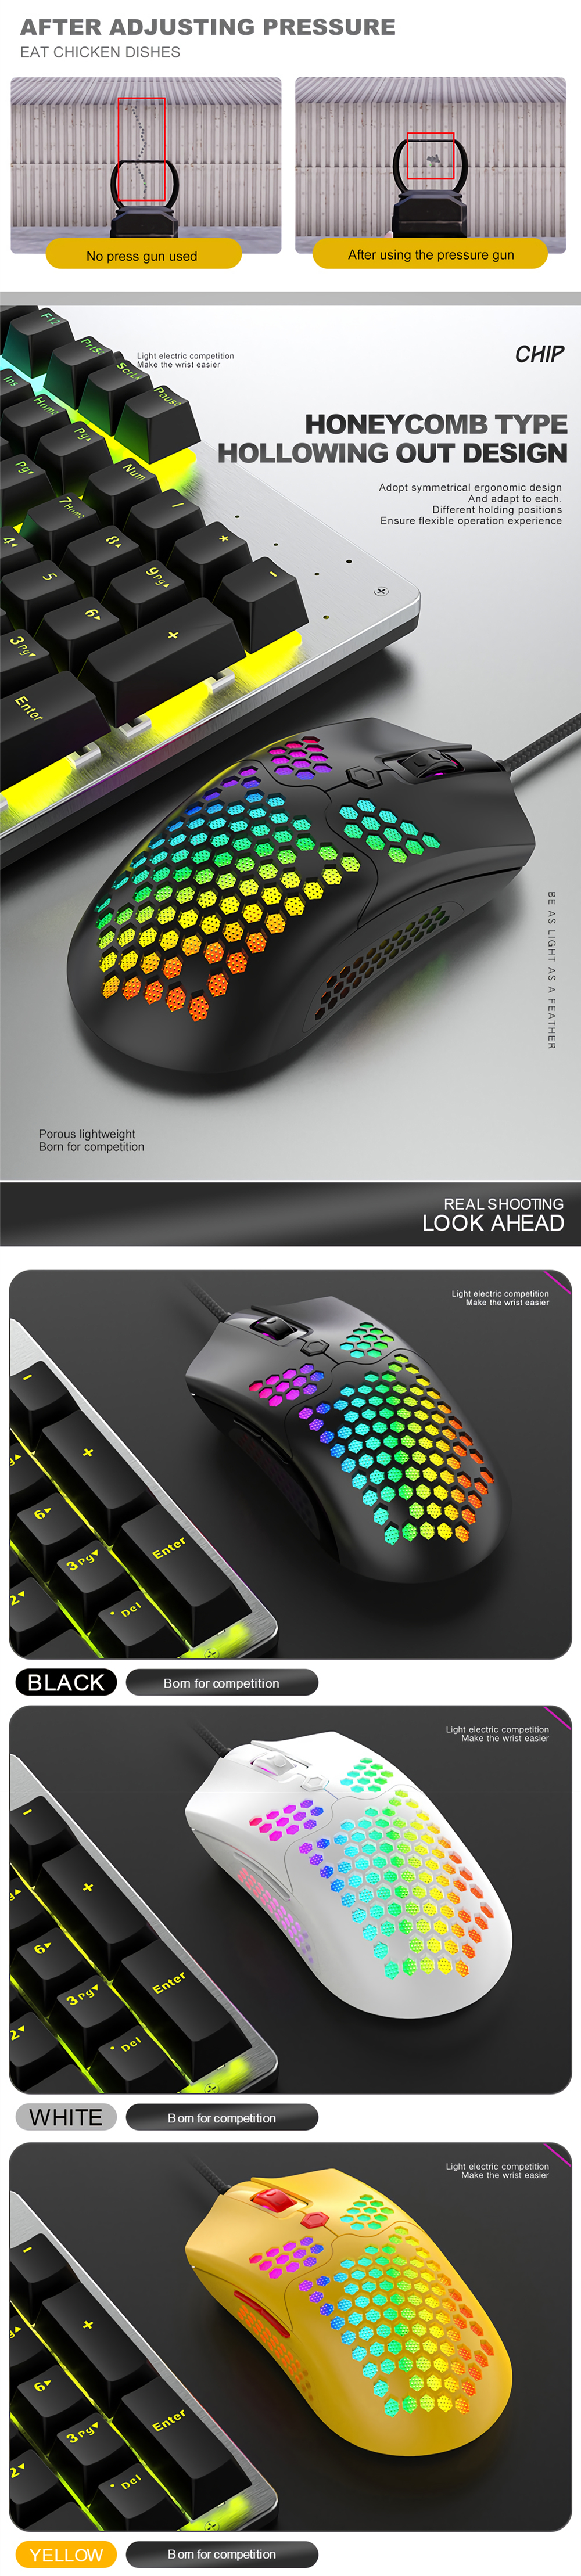 Free-wolf M5 Wired Game Mouse Breathing RGB Colorful Hollow Honeycomb Shape 12000DPI Gaming Mouse USB Wired Gamer Mice for Desktop Computer Laptop PC 18